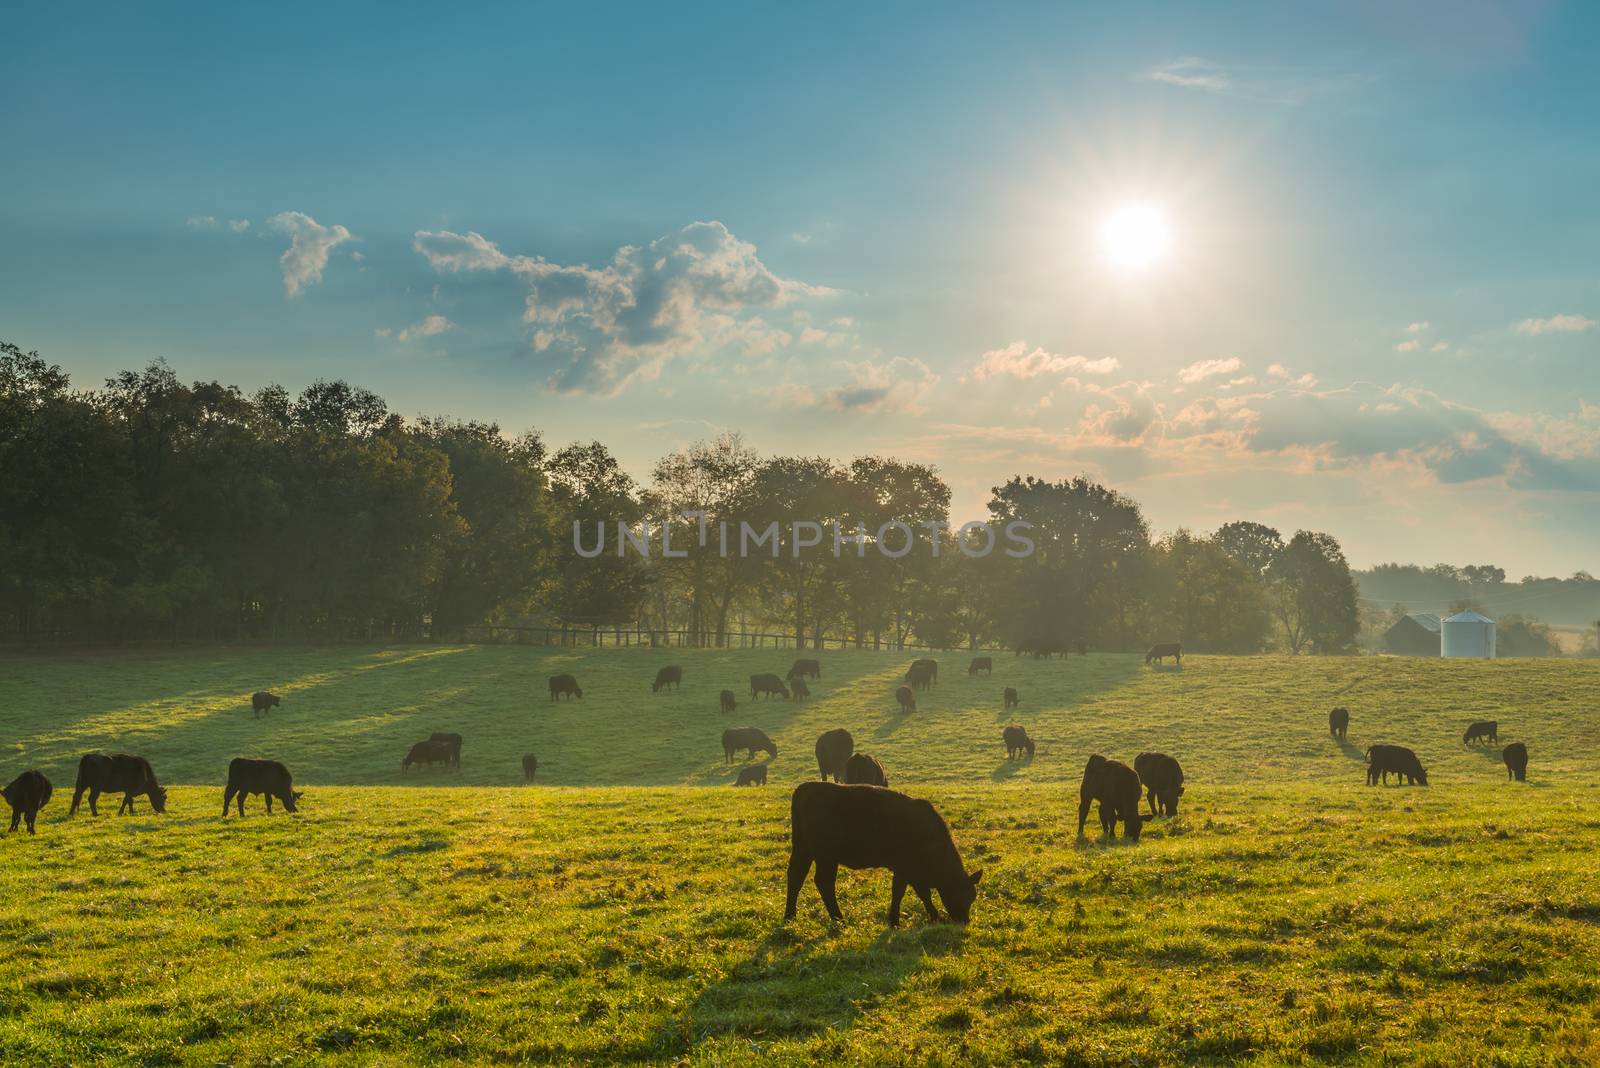 Cows grazing in the morning sun.